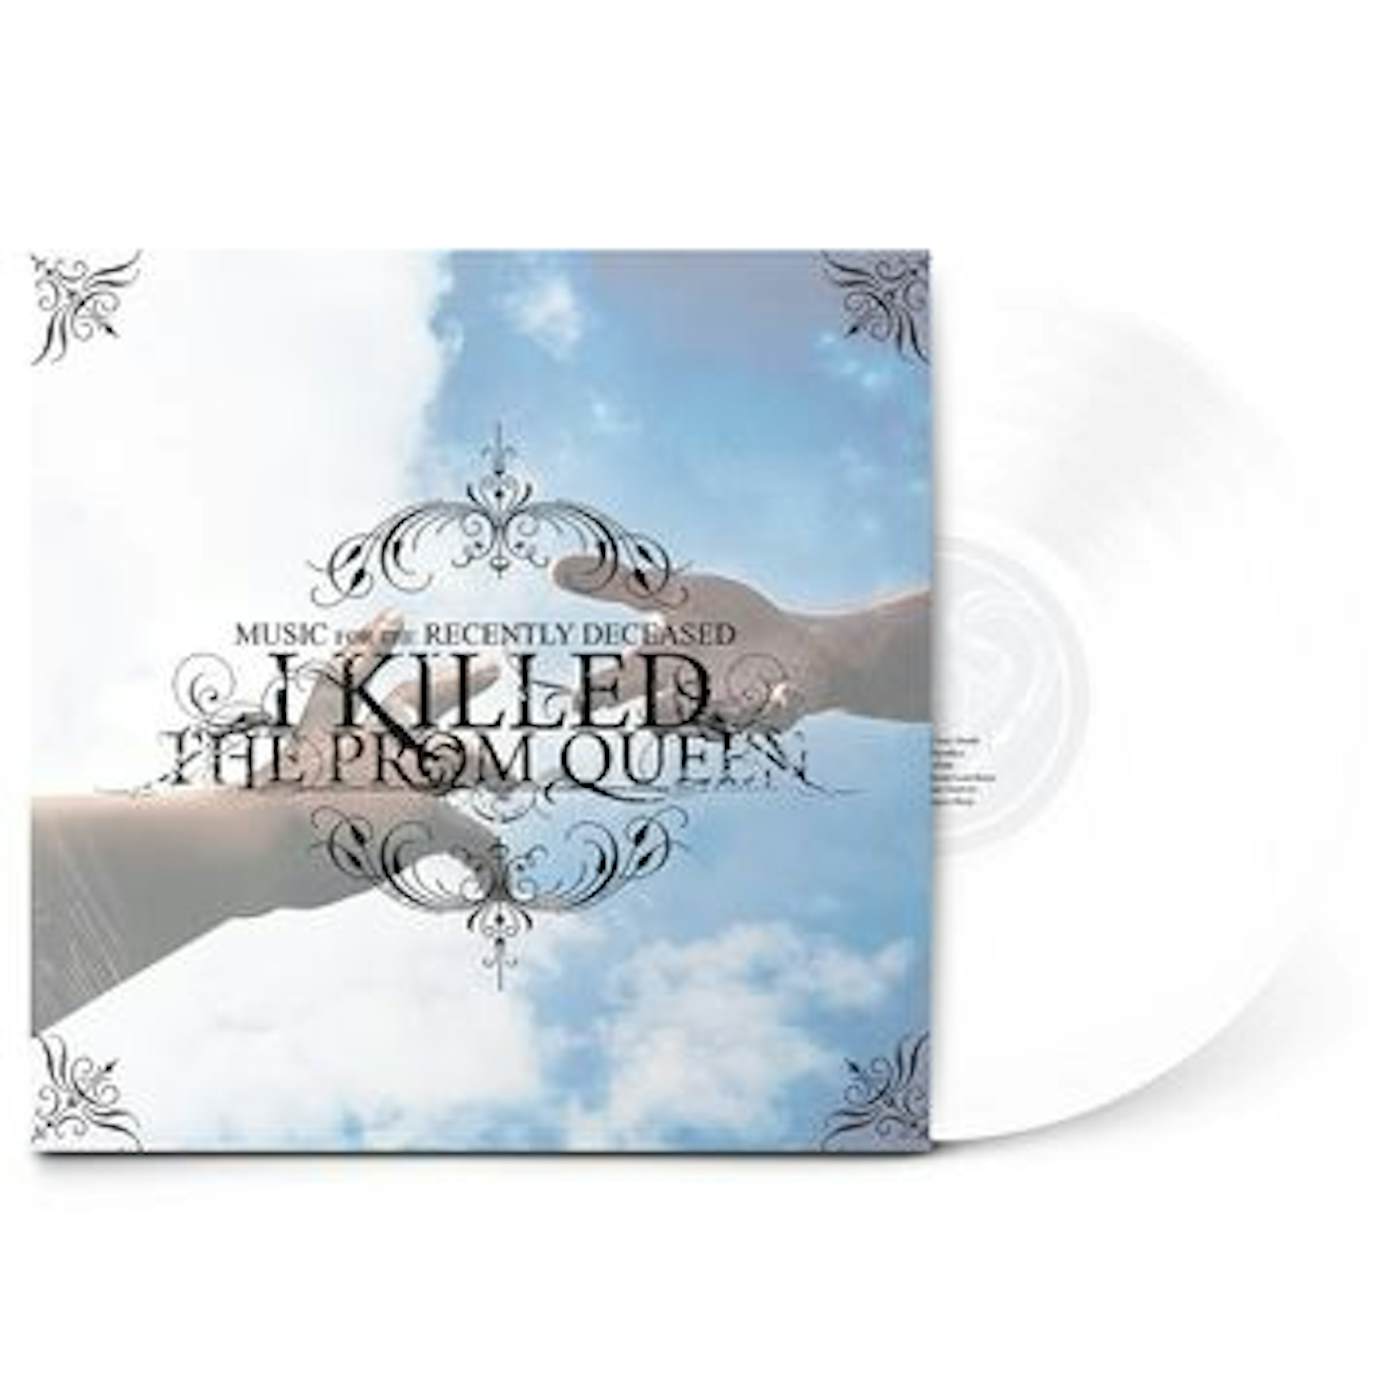 I Killed The Prom Queen Music For The Recently Deceased Vinyl Record